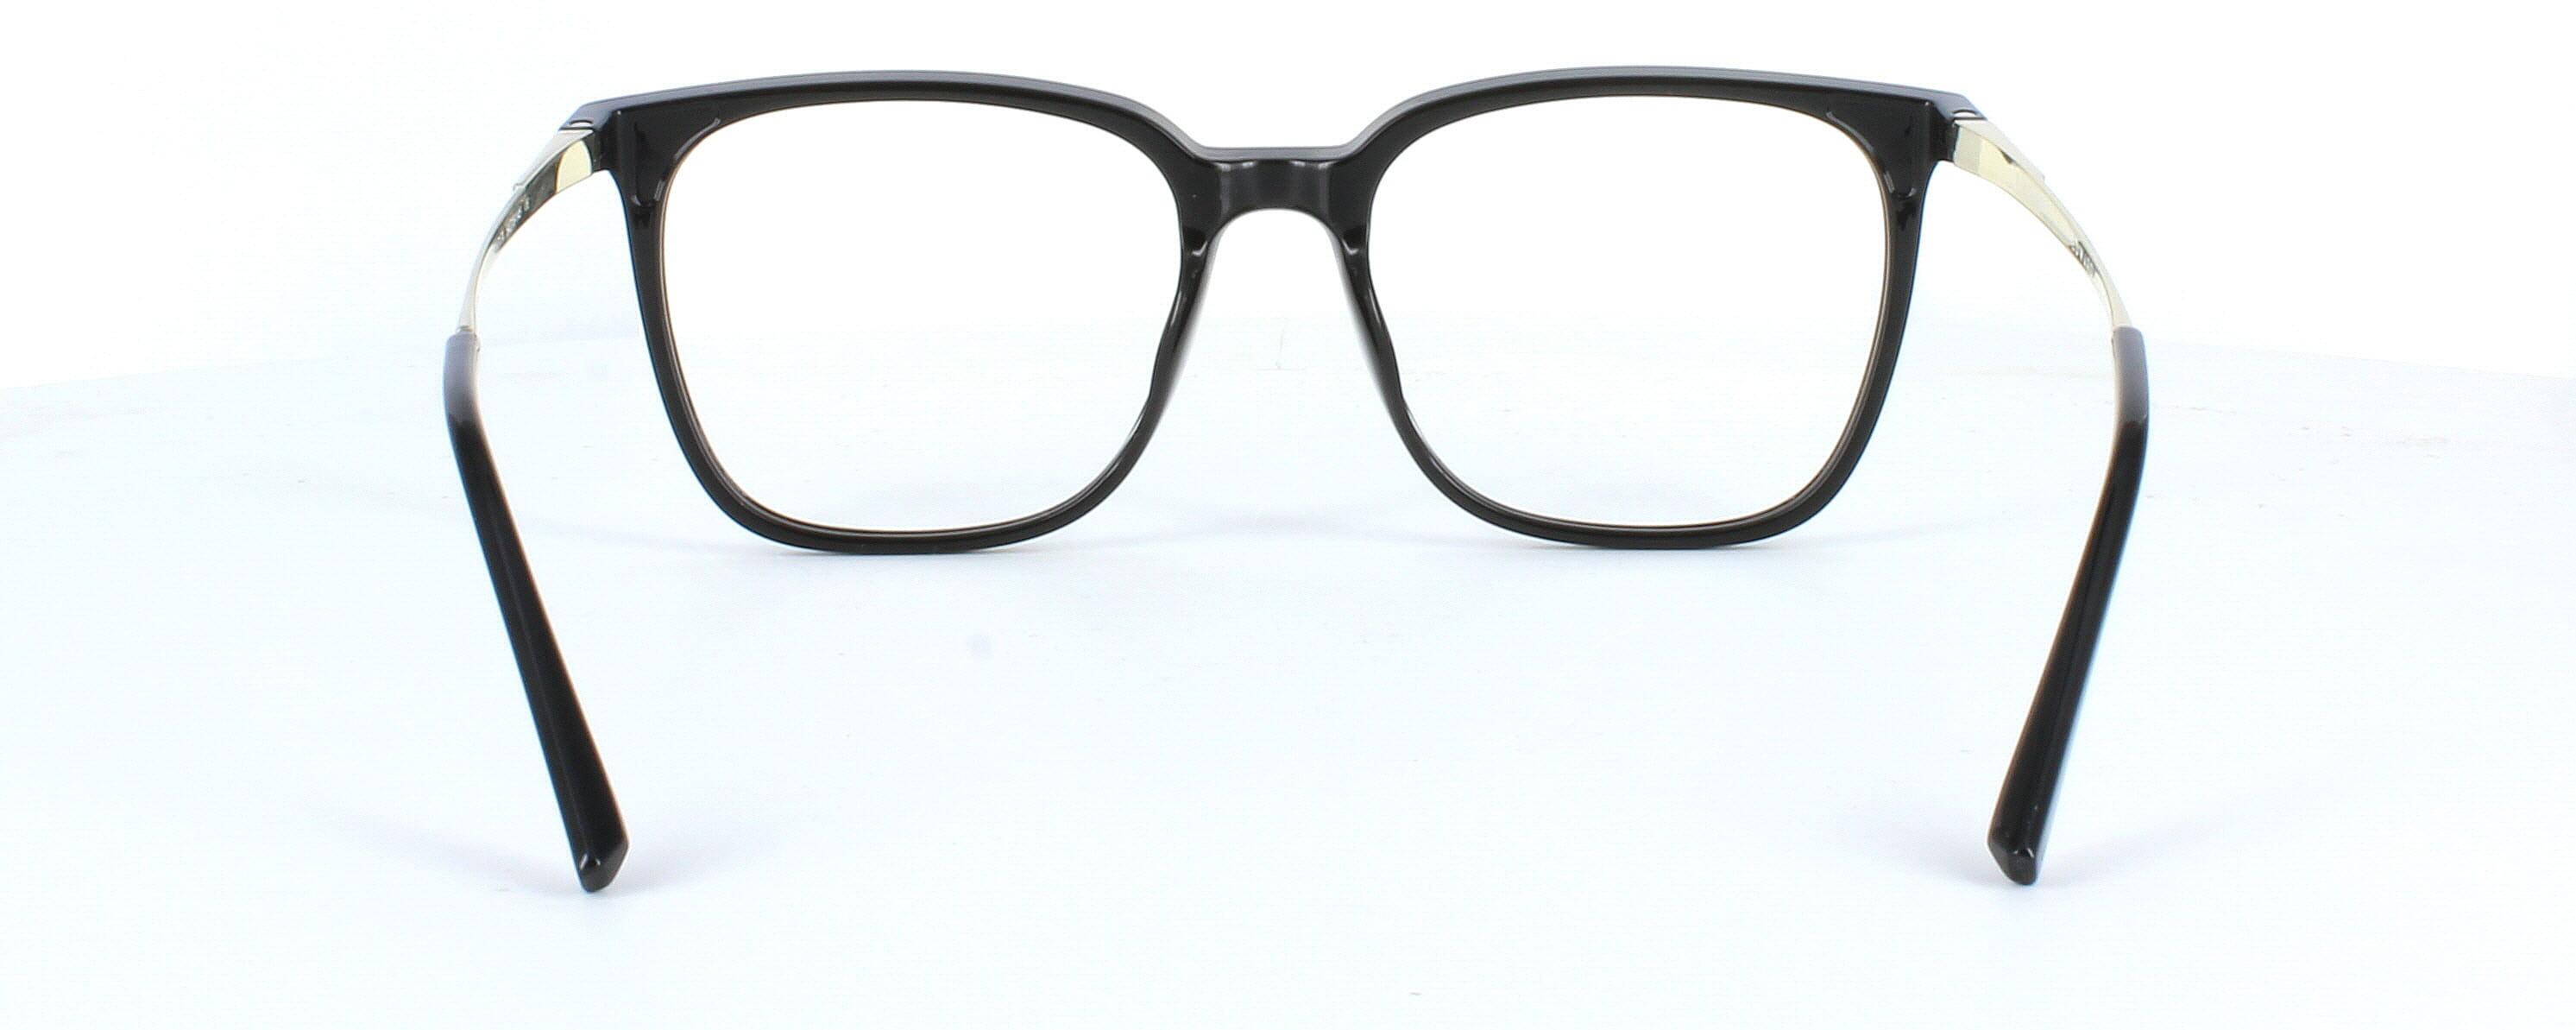 Edward Scotts ST6202 - Shiny black - Gent's acetate frame with square shaped lenses with silver titanium arms - image view 4